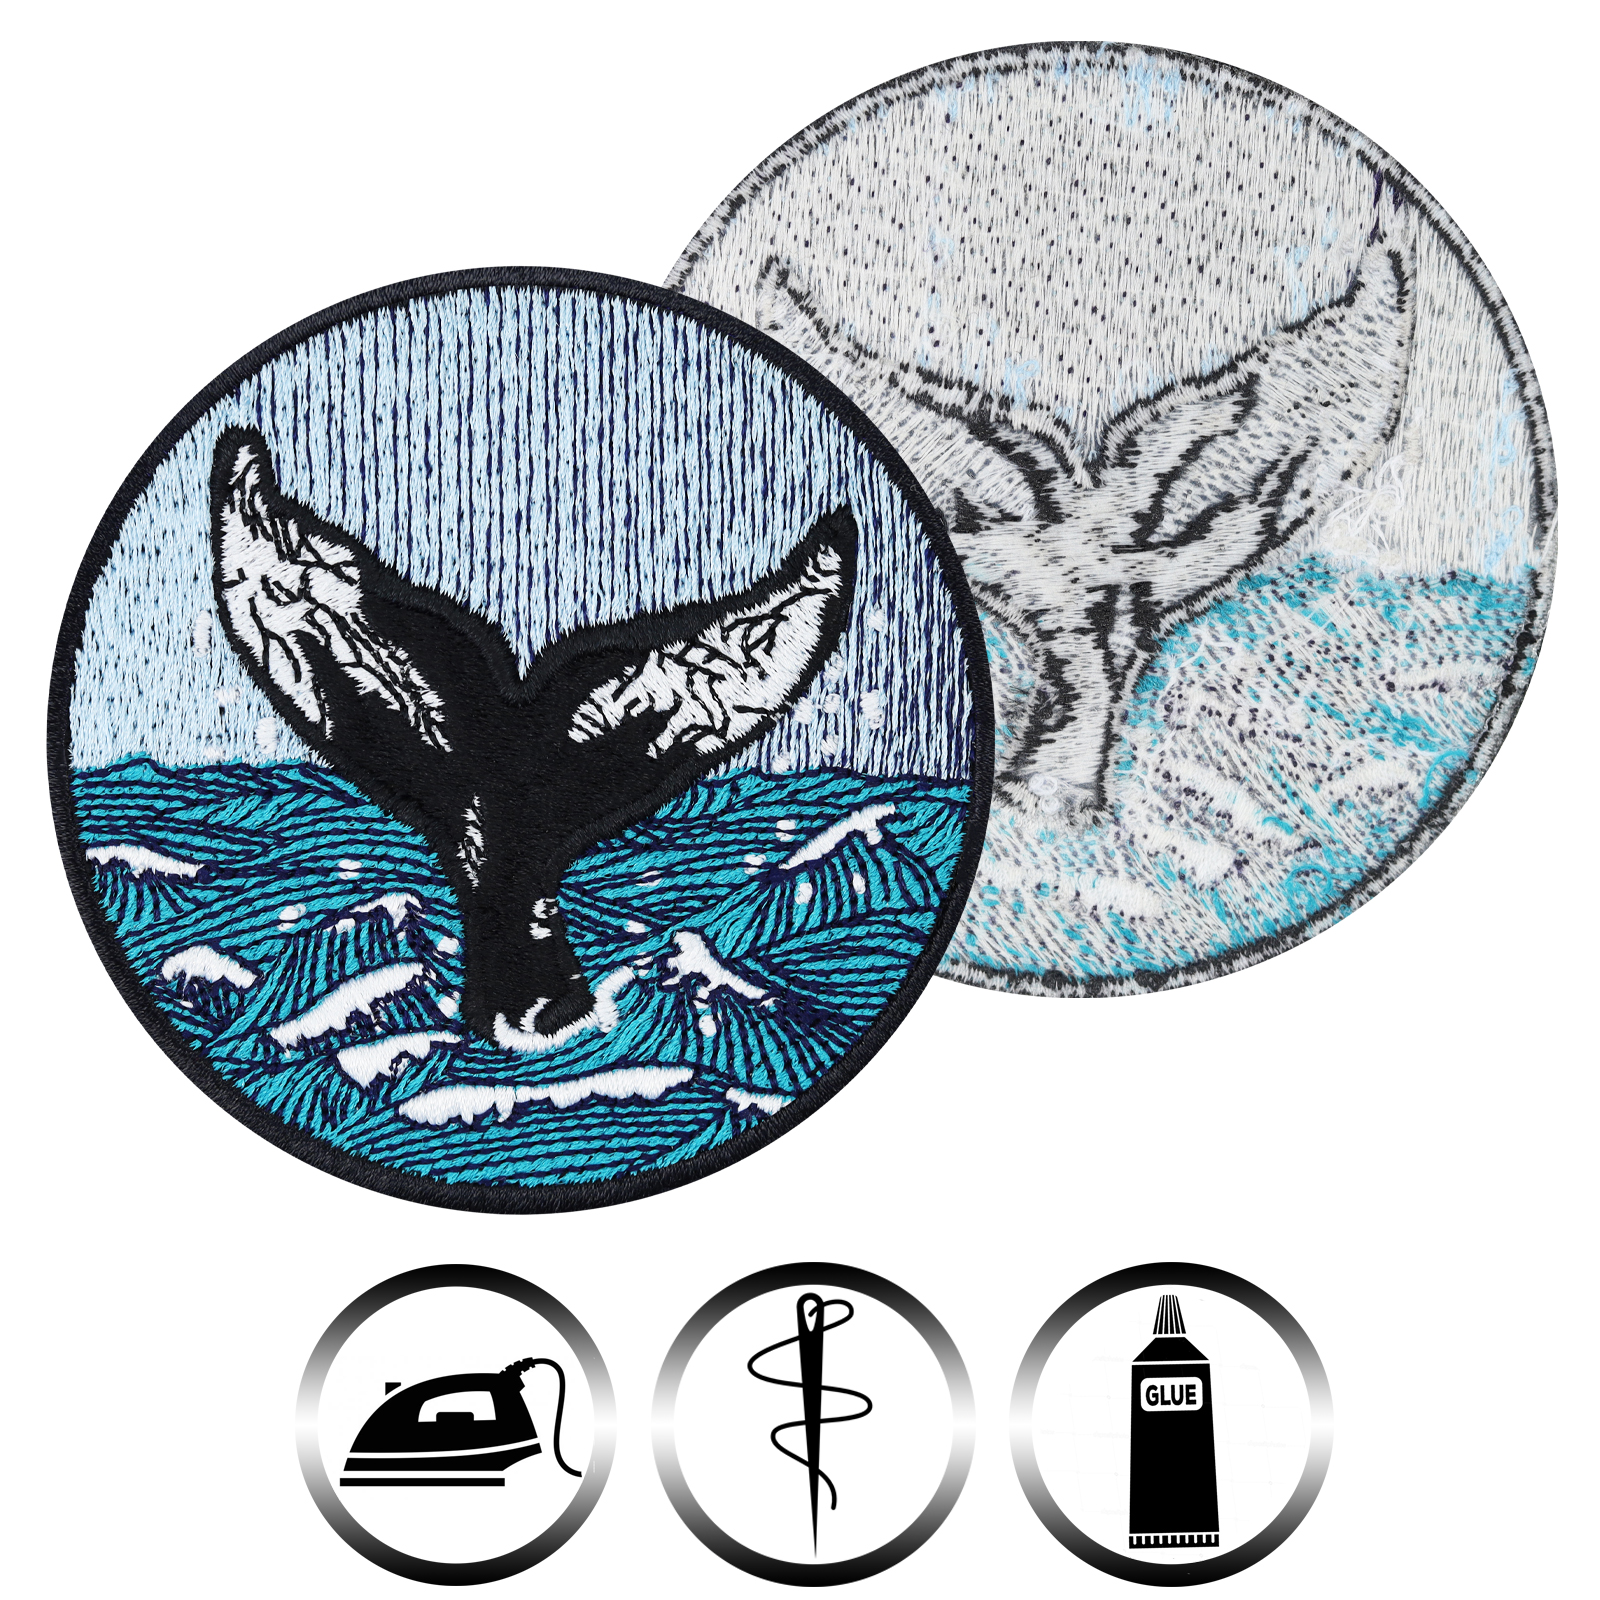 Walflosse Orca - Patch